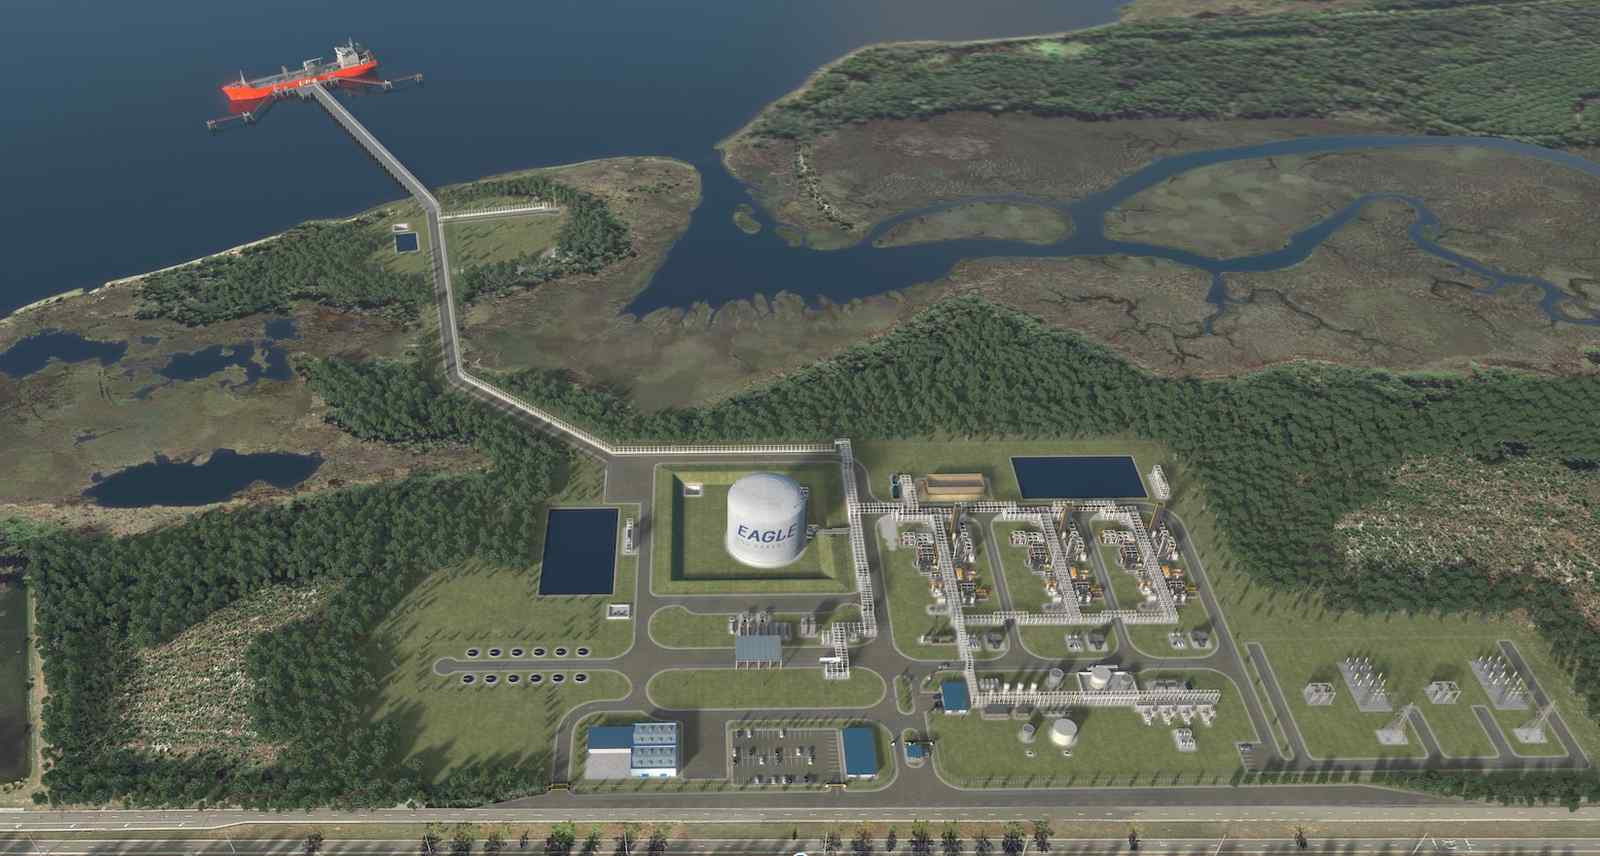 Eagle LNG’s Jacksonville LNG Export Facility Receives Final Environmental Impact Statement from FERC